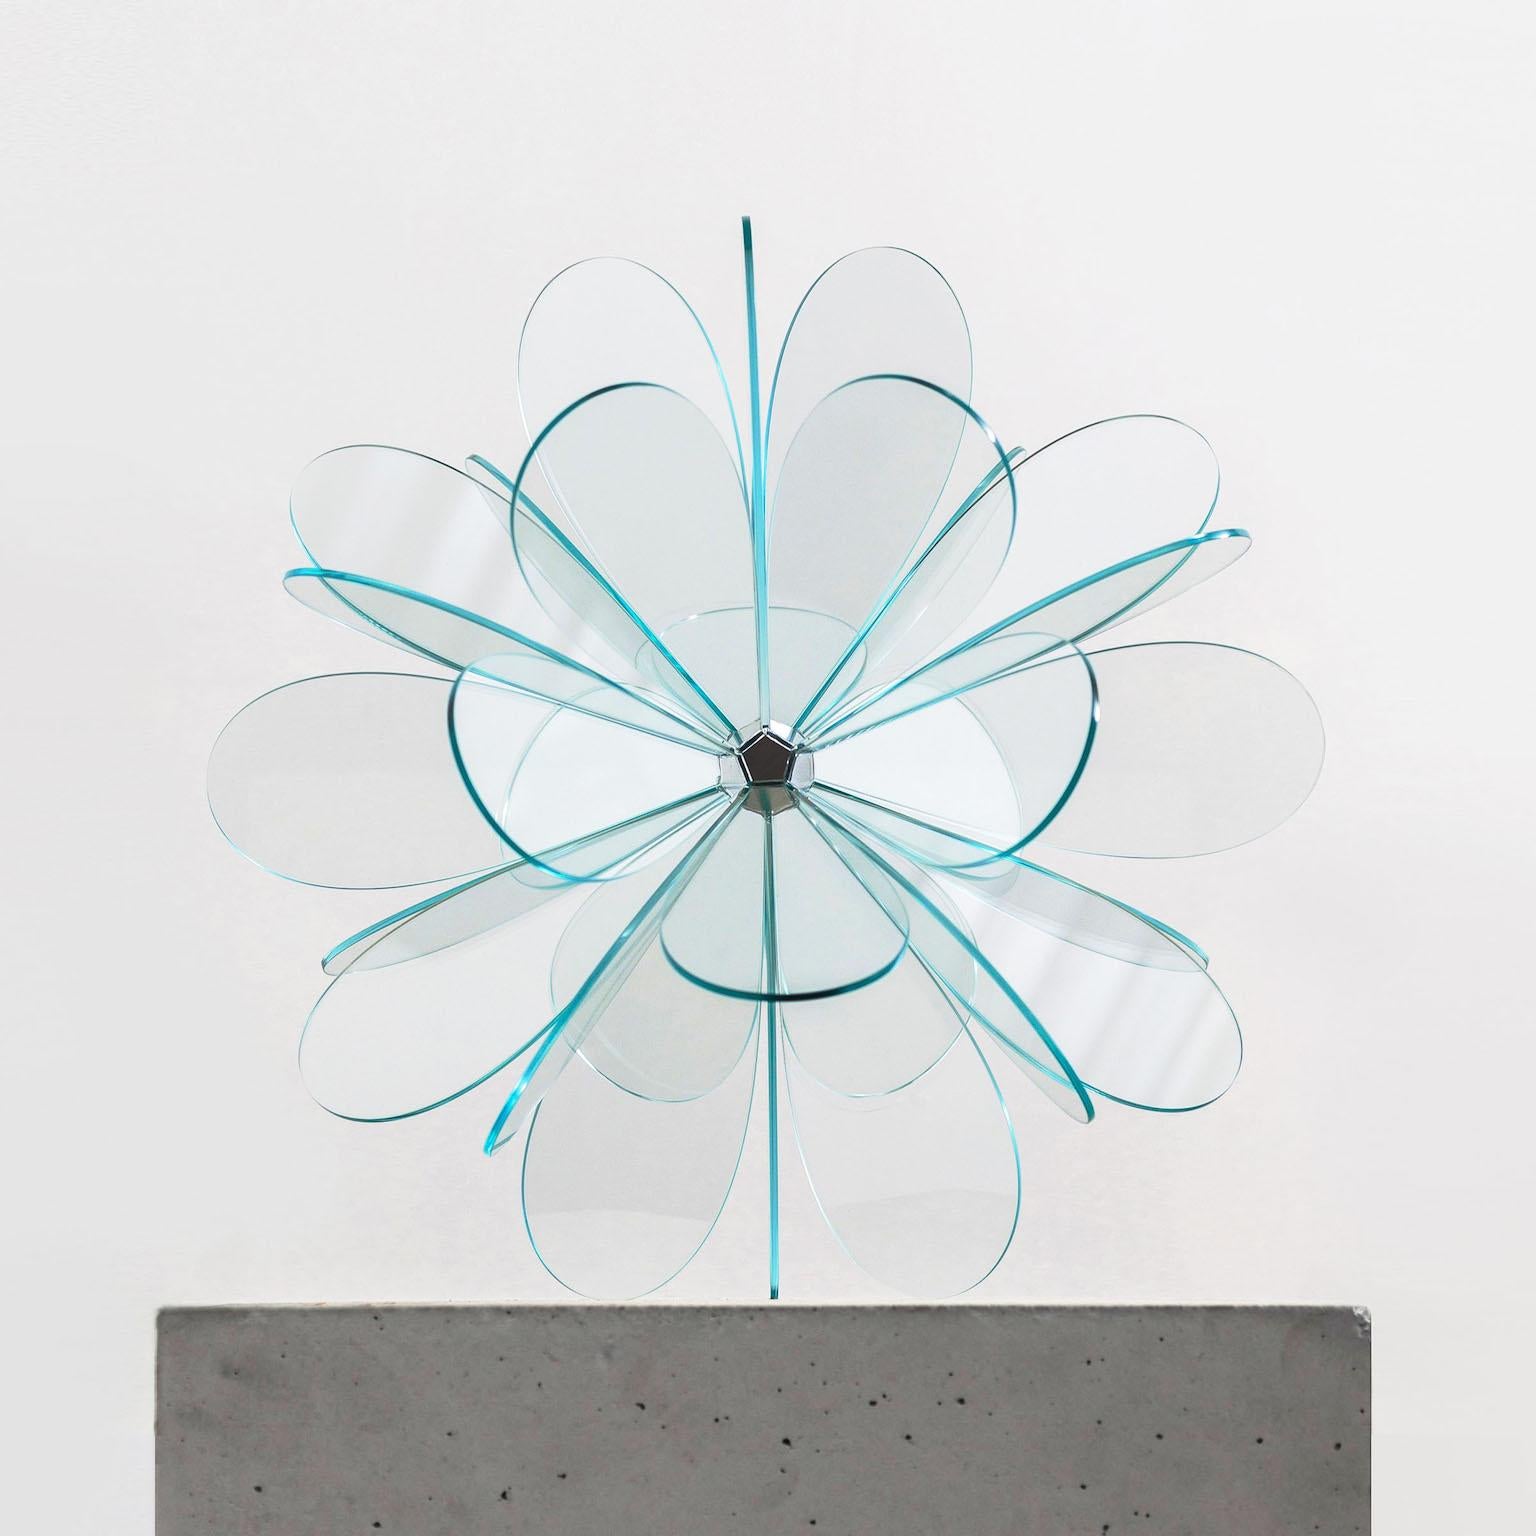 Norman Mooney Abstract Sculpture - "Bloom No. 5" from the Bloom Series, Abstract, Organic Sculpture in Glass